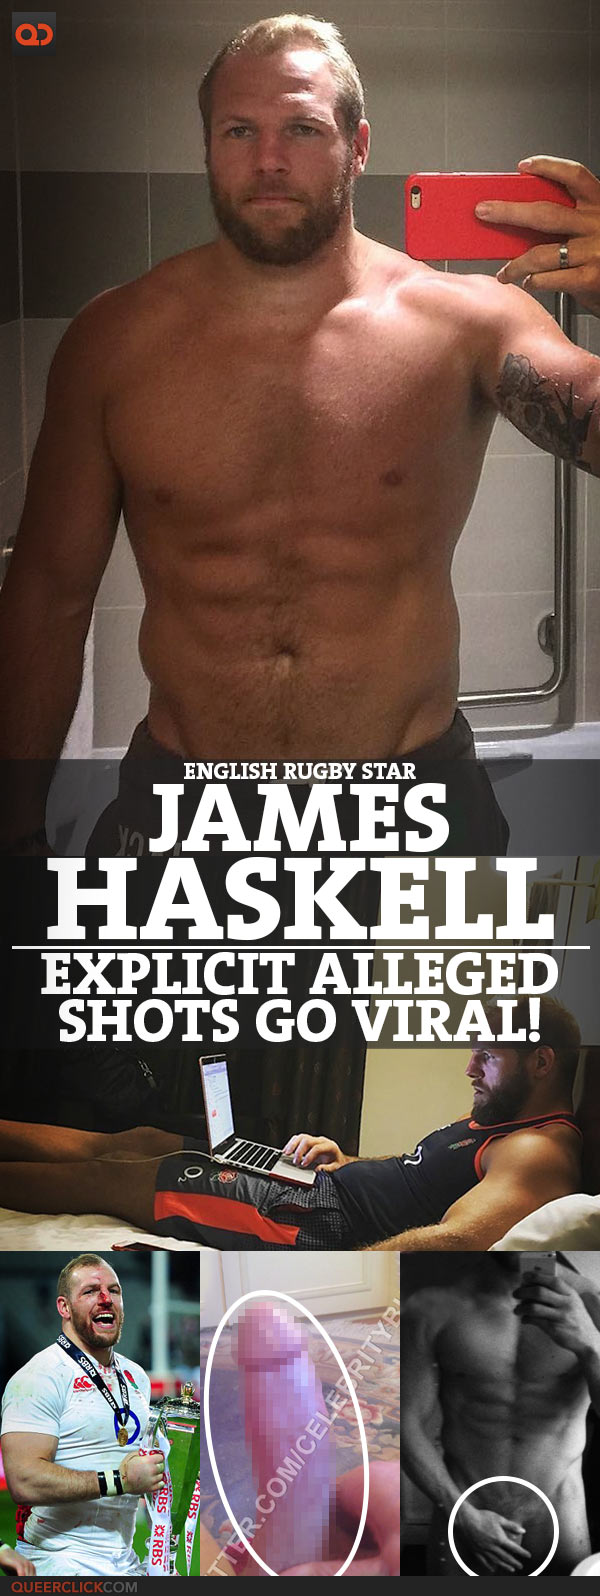 James Haskell, English Rugby Star, Explicit Alleged Shots Go Viral!